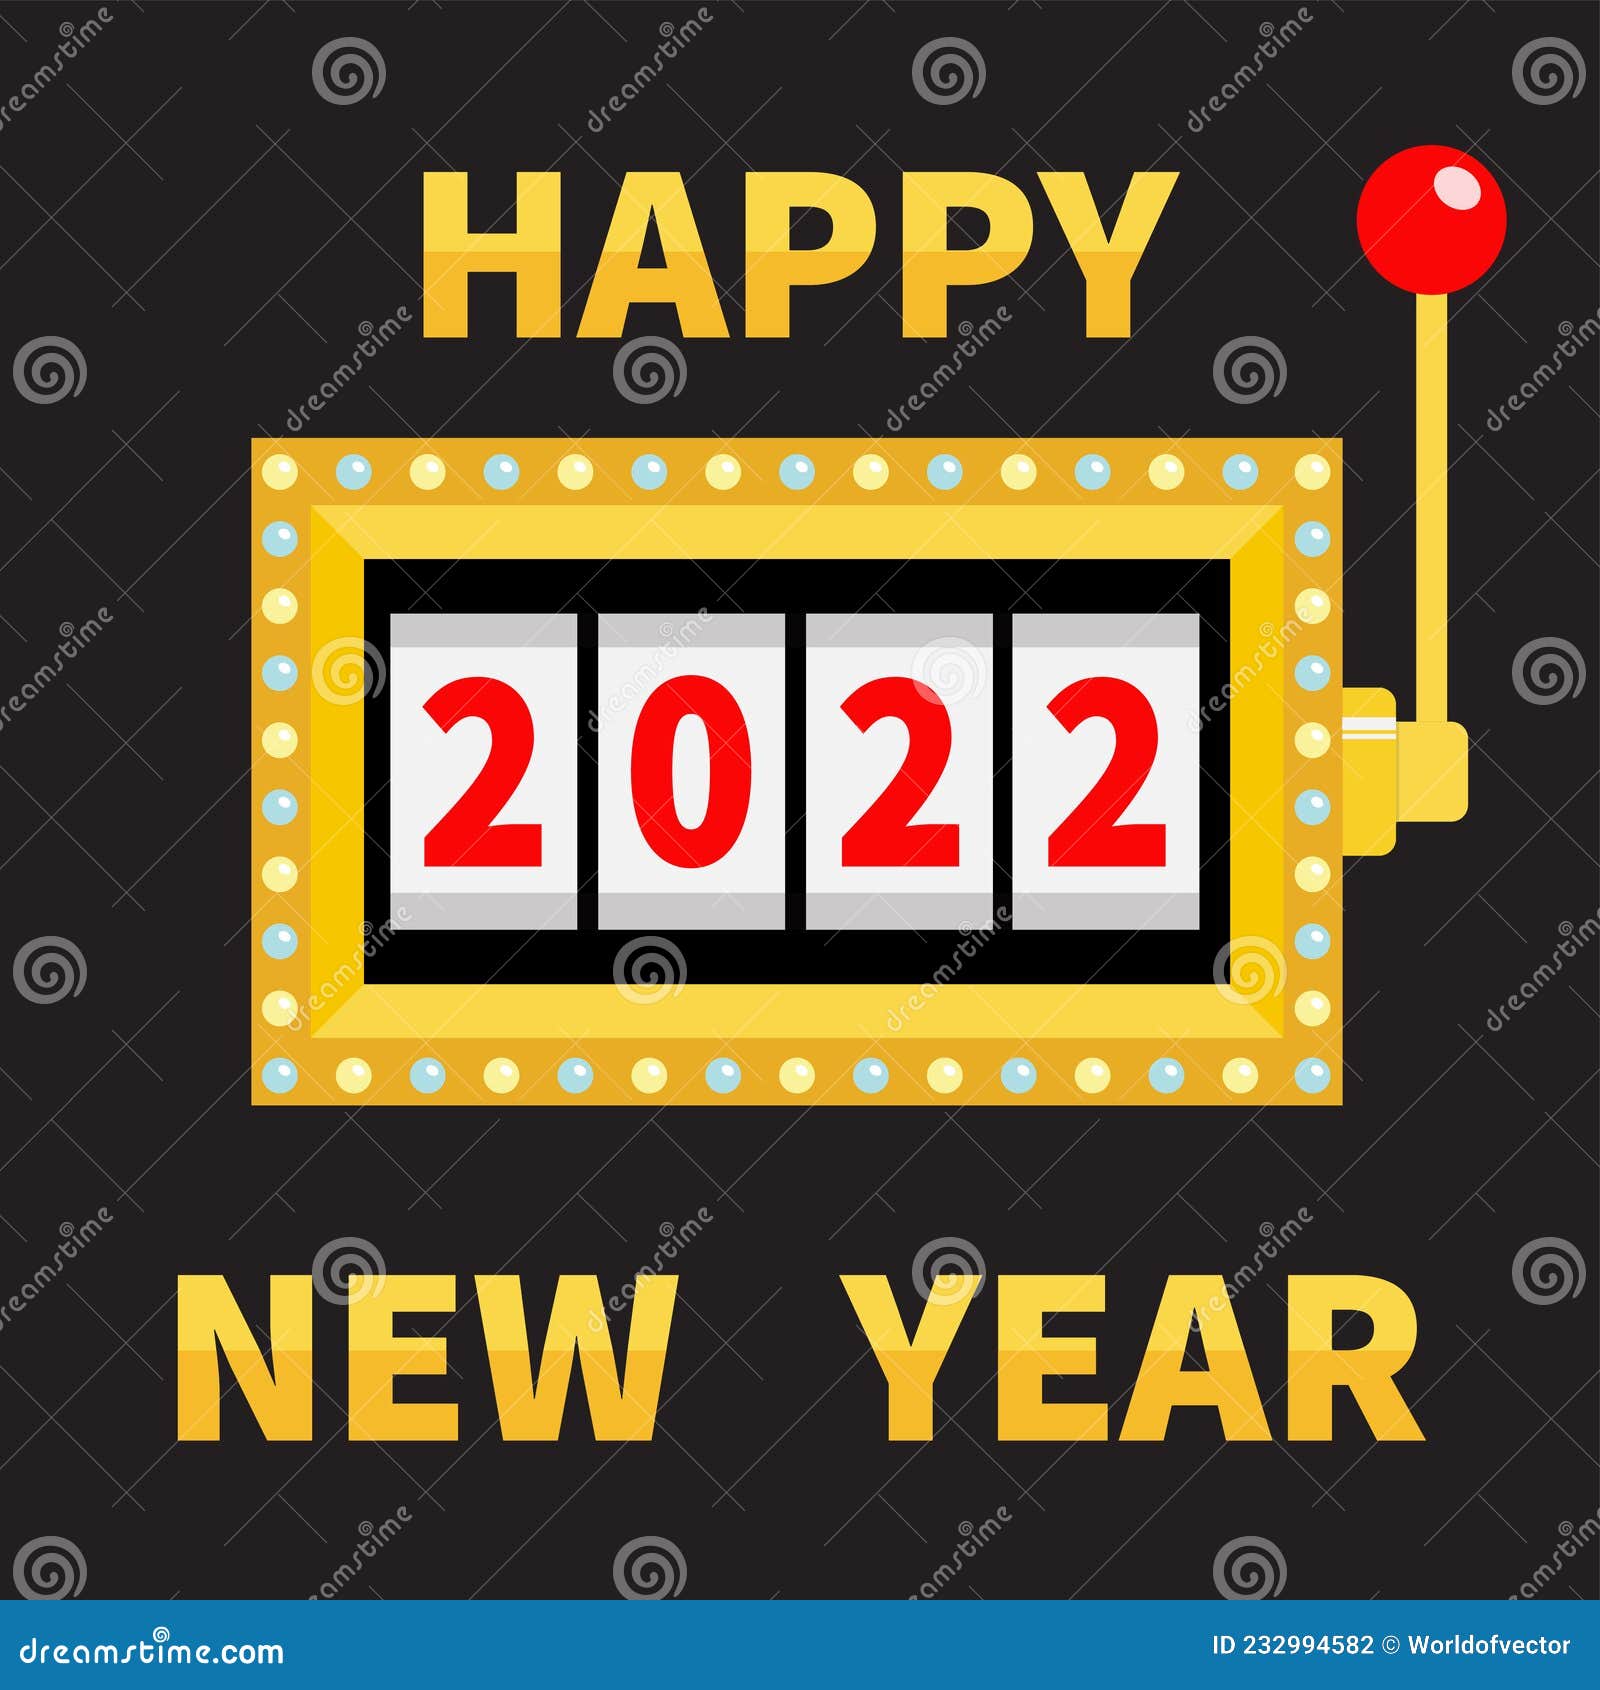 Happy New Year 2022. Slot Machine. Jackpot. Golden Glowing Lamp Light. Red  Handle Lever. Big Win Online Casino, Gambling Club Sign Stock Vector -  Illustration of business, money: 232994582